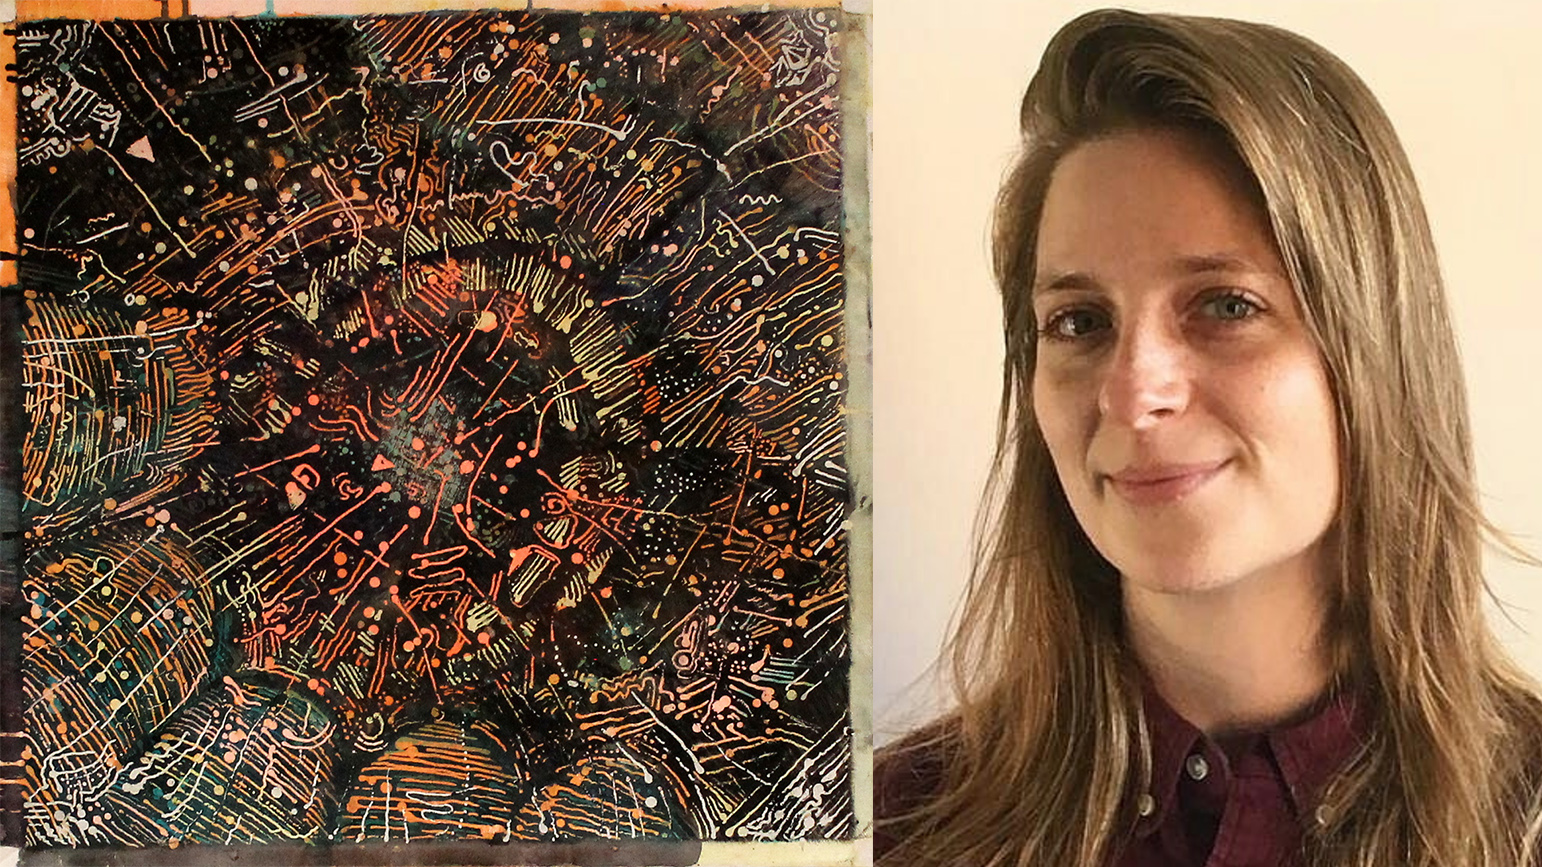 Image of an abstract artwork next to a headshot of a woman